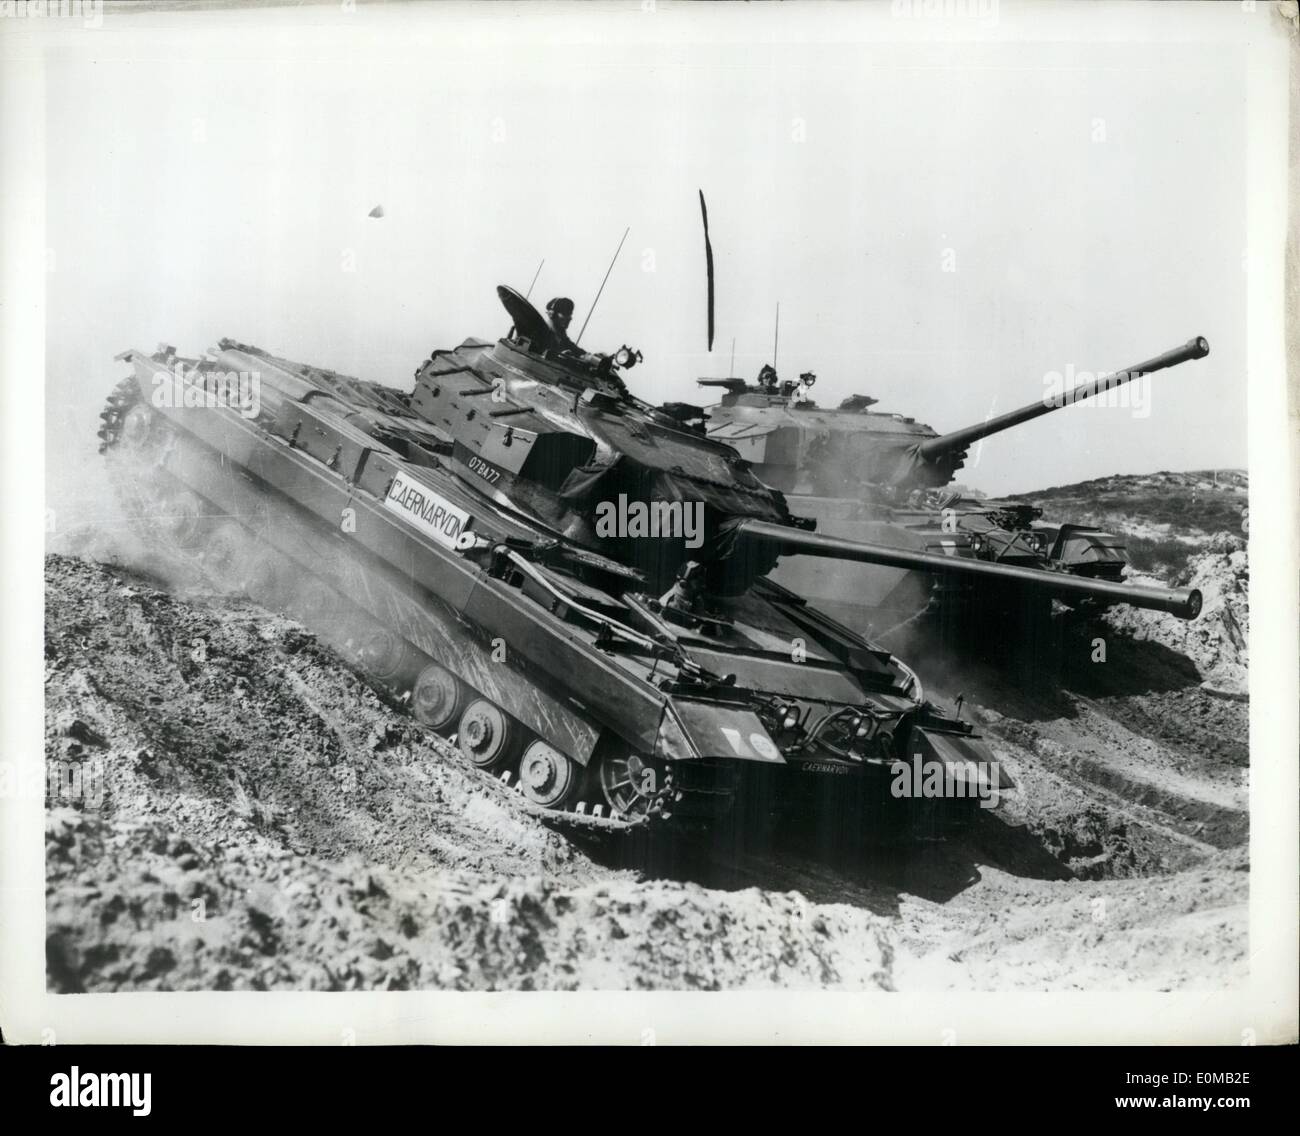 May 05, 1954 - ''Stand-In'' Tank Shows The Way: The Caernarvon, experimental British tank described by Britain's War Minister Antony Head as probably the most powerful in the world, was put through its paces recently at the British Royal Armored Corps Center's annual demonstration of armored fighting vehicles. The Caernarvon has the engine and chassis of the Conqueror, Britain's new super tank, for which it stands in at troop trials pending delivery of the Conqueror. Its turret is that of the Centurion which won high Allied praise in Korea Stock Photo